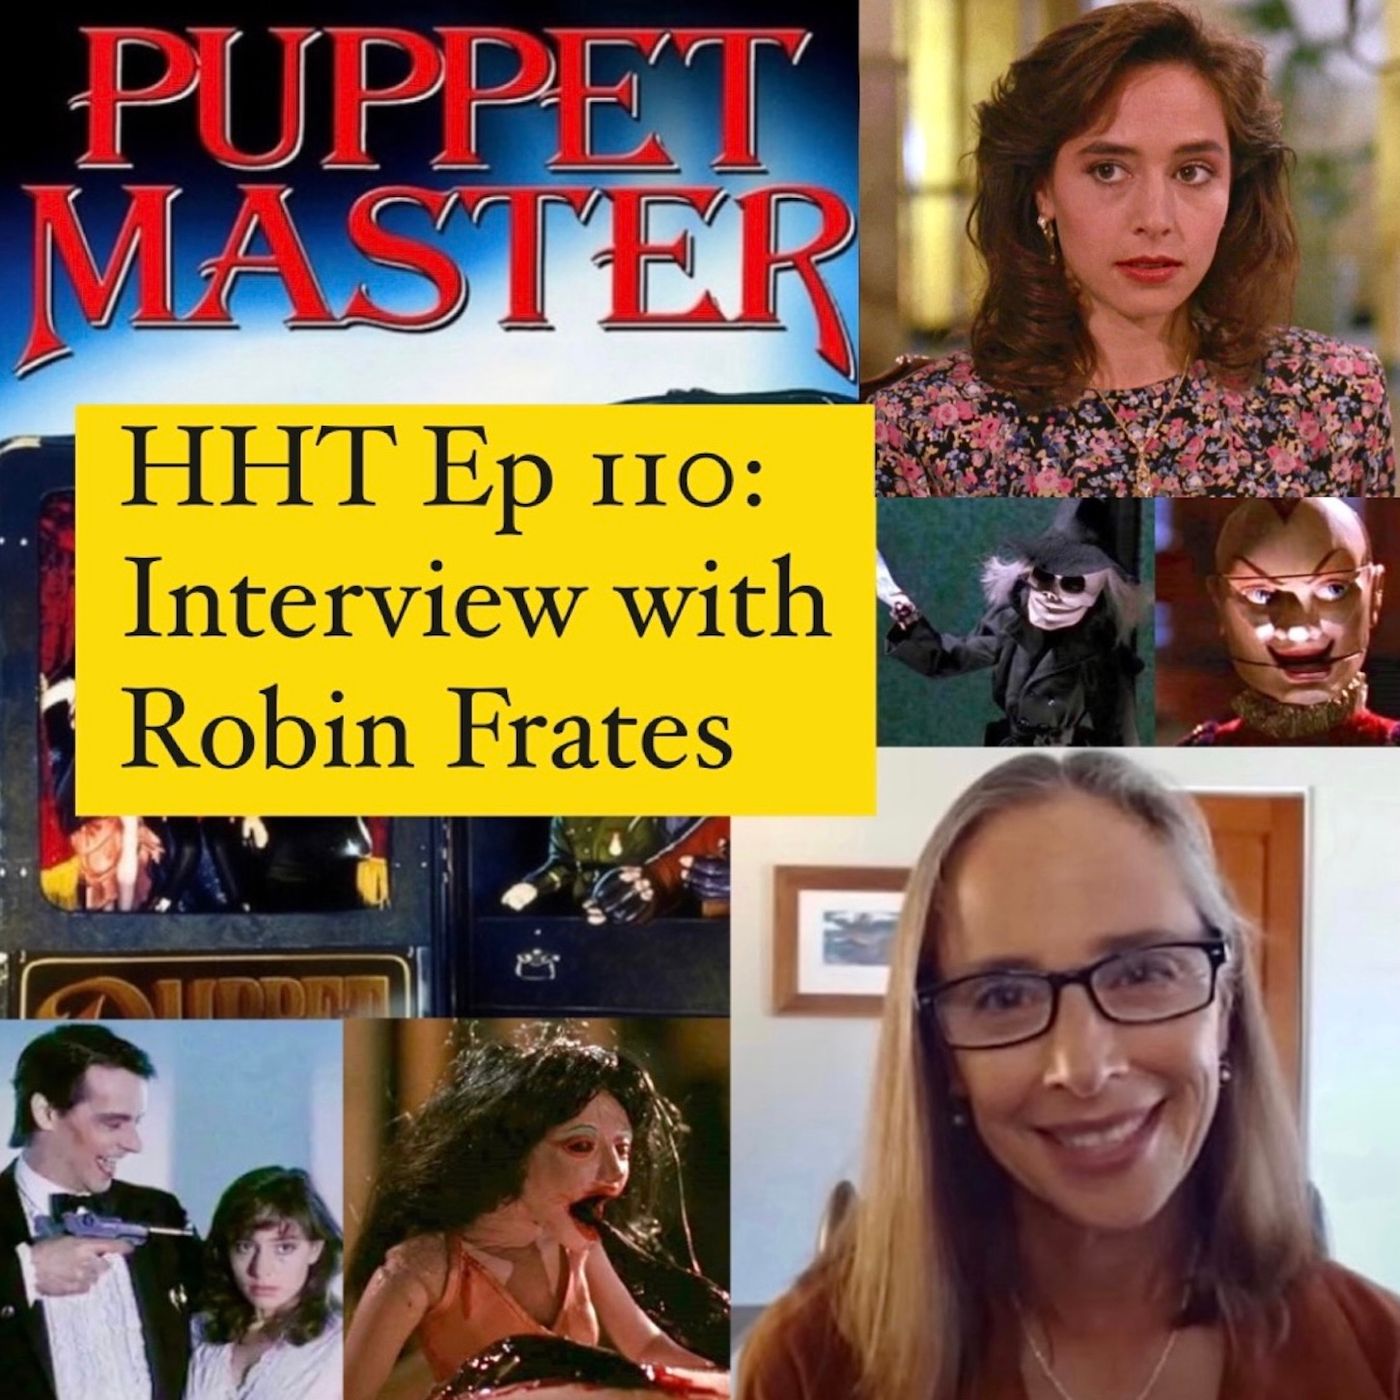 Ep 110: Interview w/Robin Frates from "Puppet Master" Image